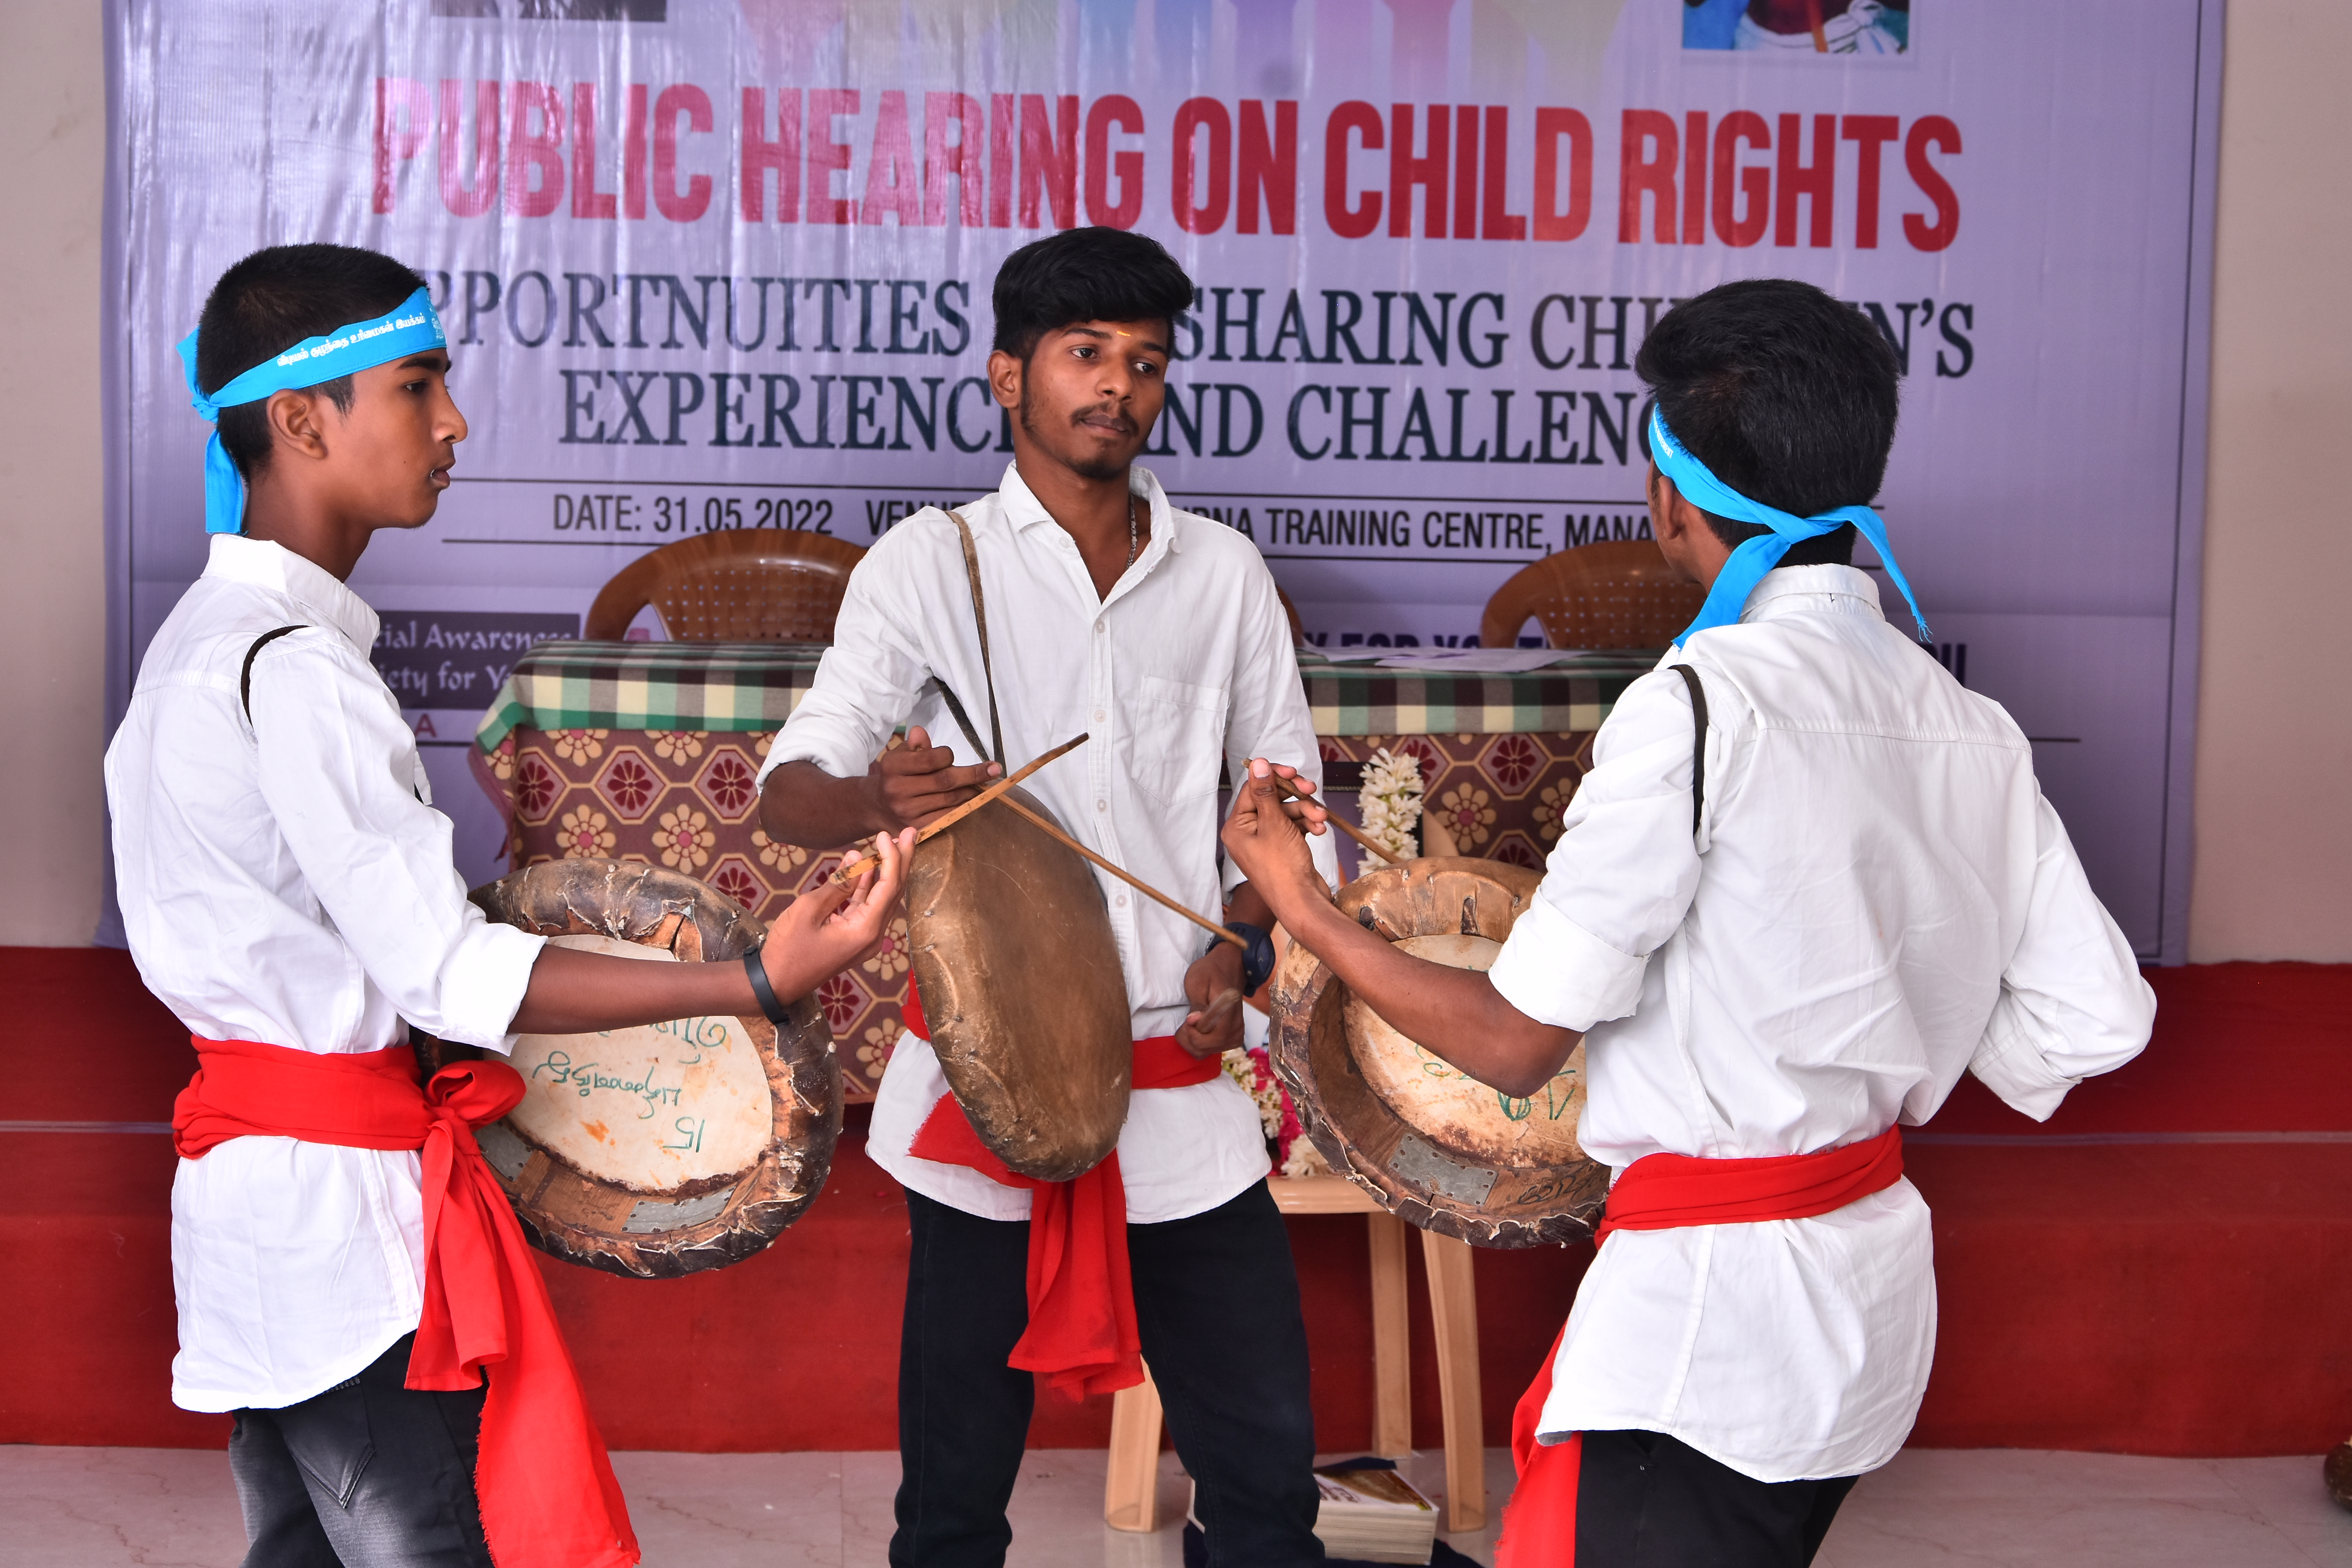 Public hearing On child Rights 